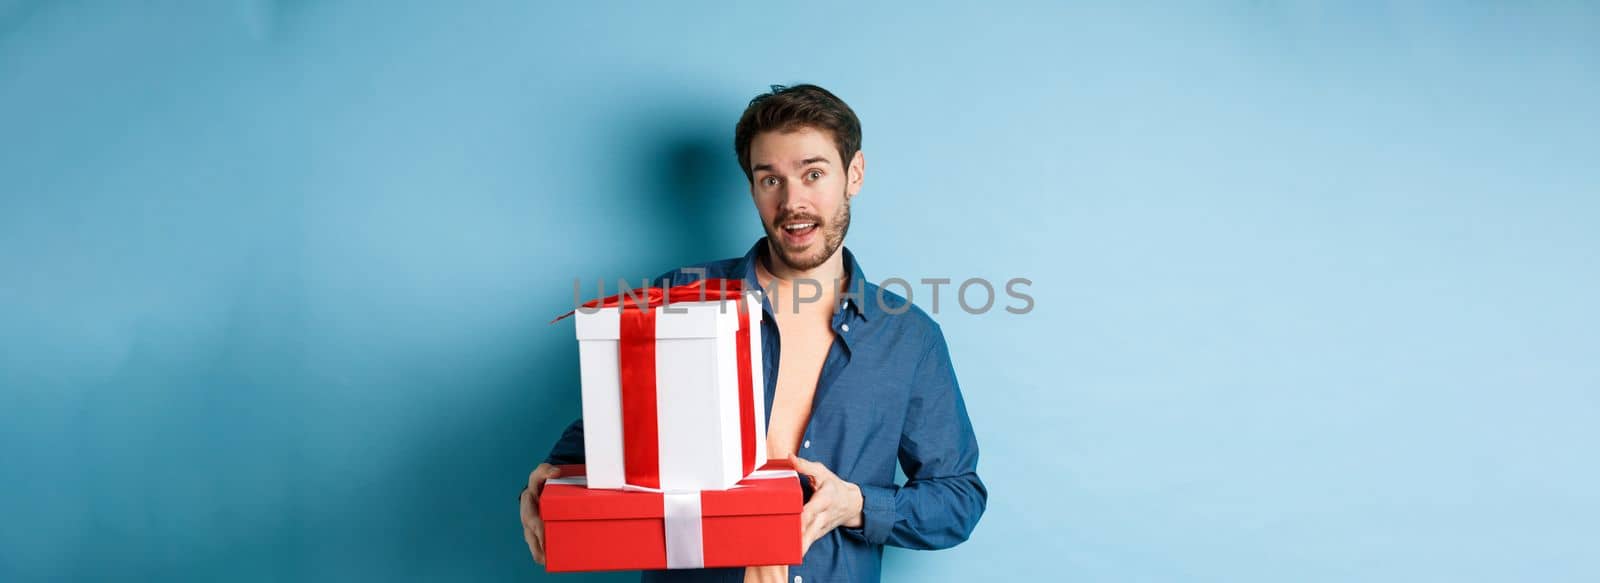 Handsome bearded guy holding Valentines day gifts for lover, standing with presents in boxes and looking at camera, blue background.